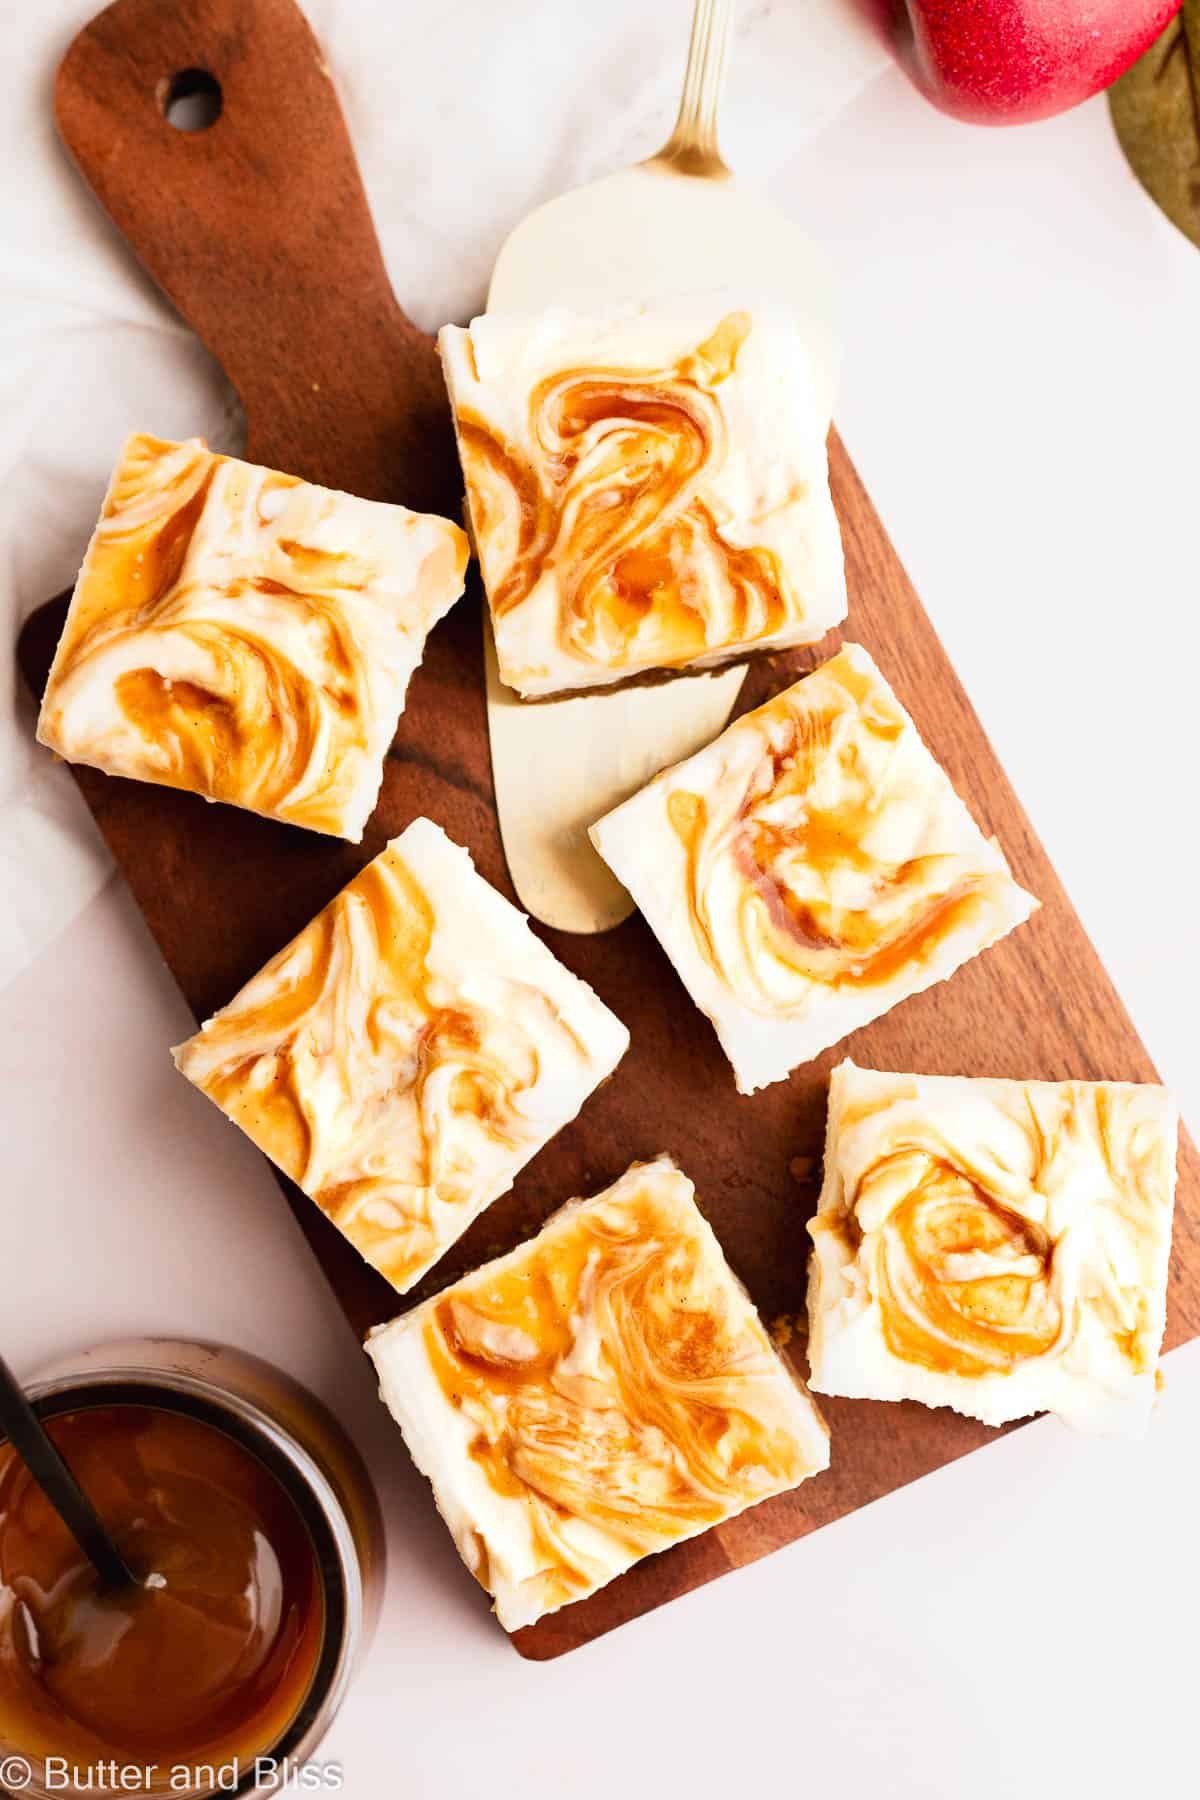 Apple cider cheesecake bars with caramel swirl sliced into perfect squares and arranged on wood cutting board.